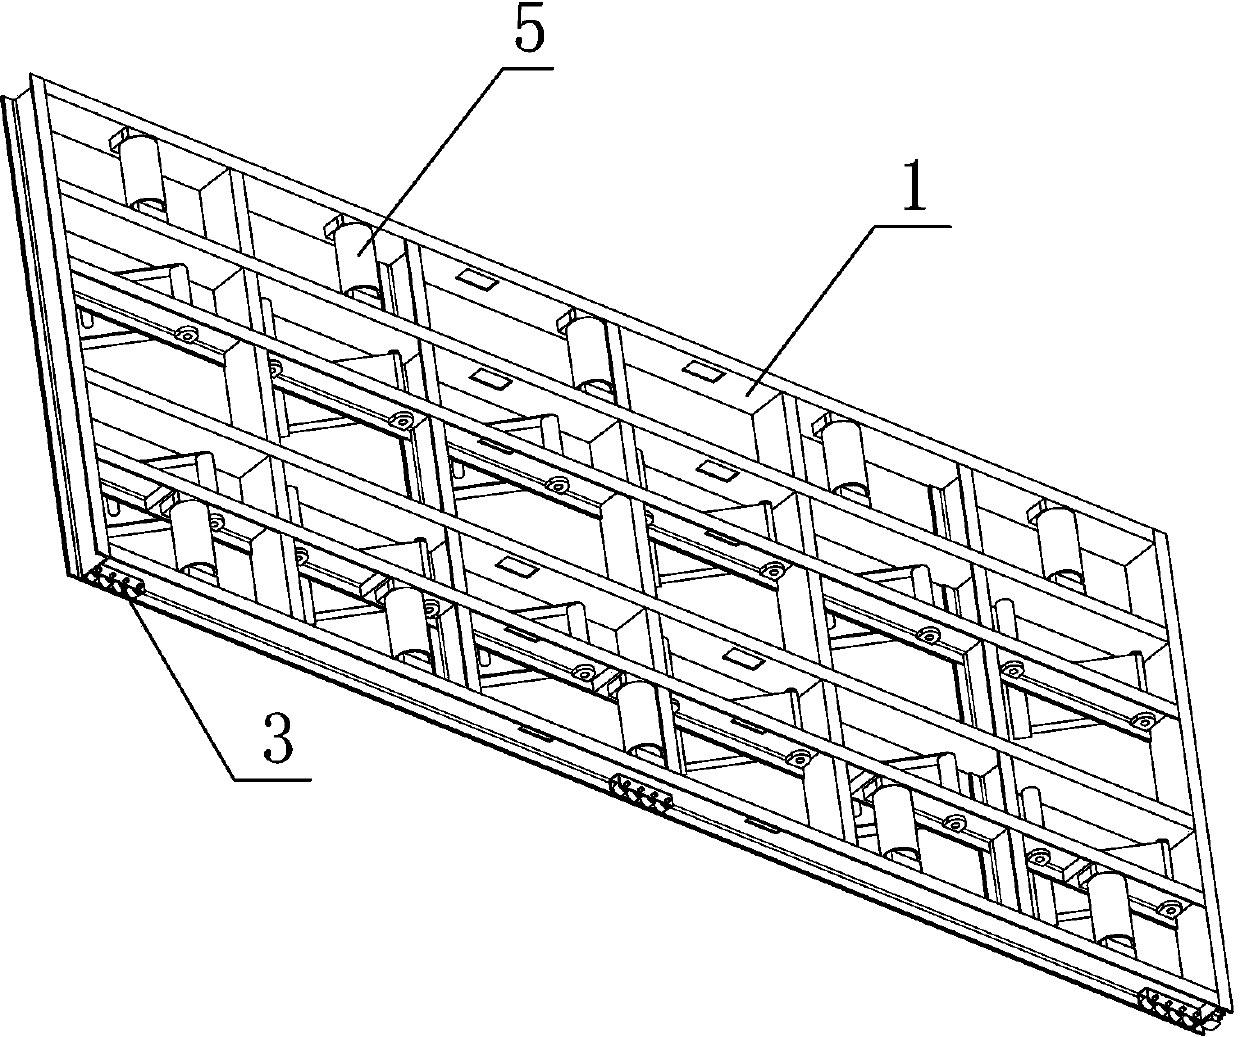 Multifunctional movable pallet with locking devices